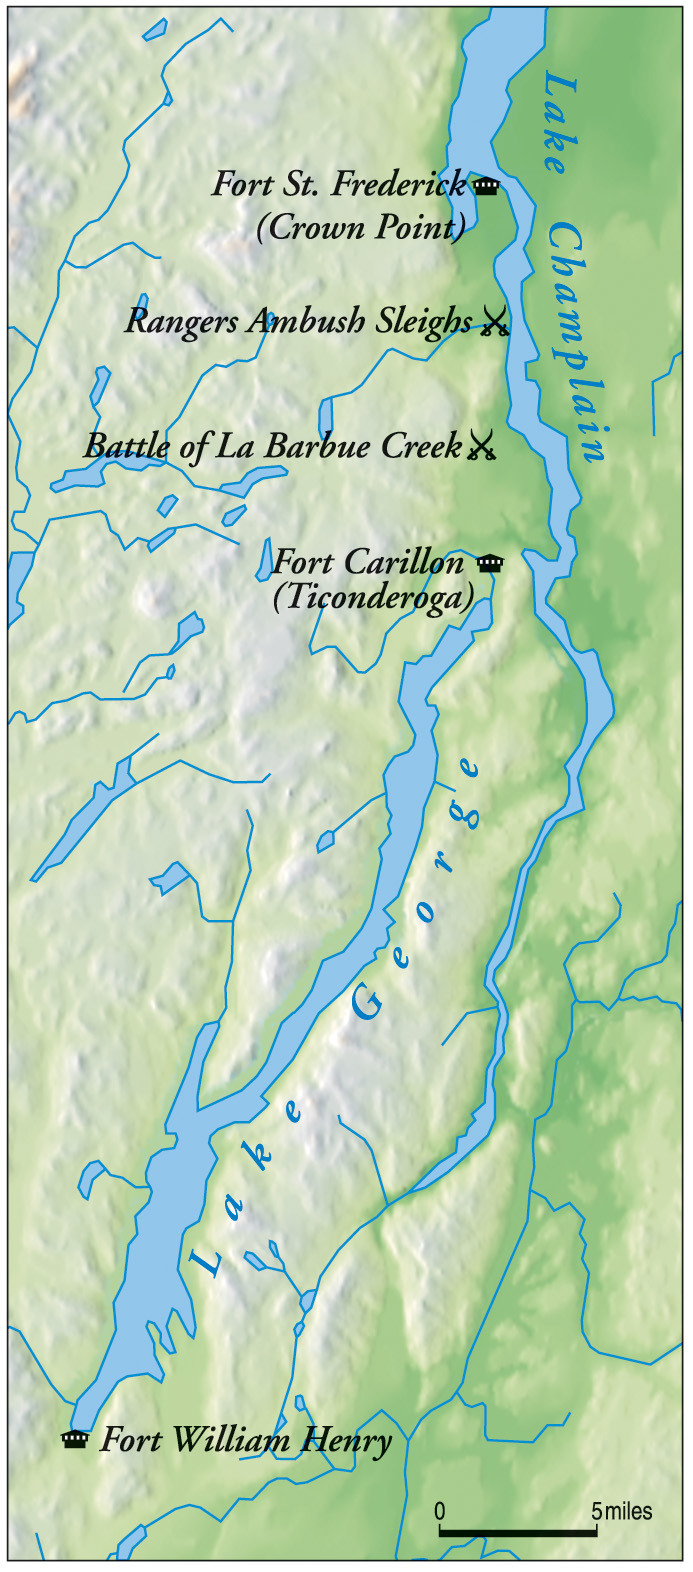 The British were at the southern end of Lake George at Fort William Henry. The French controlled the northern end, as well as Lake Champlain.  